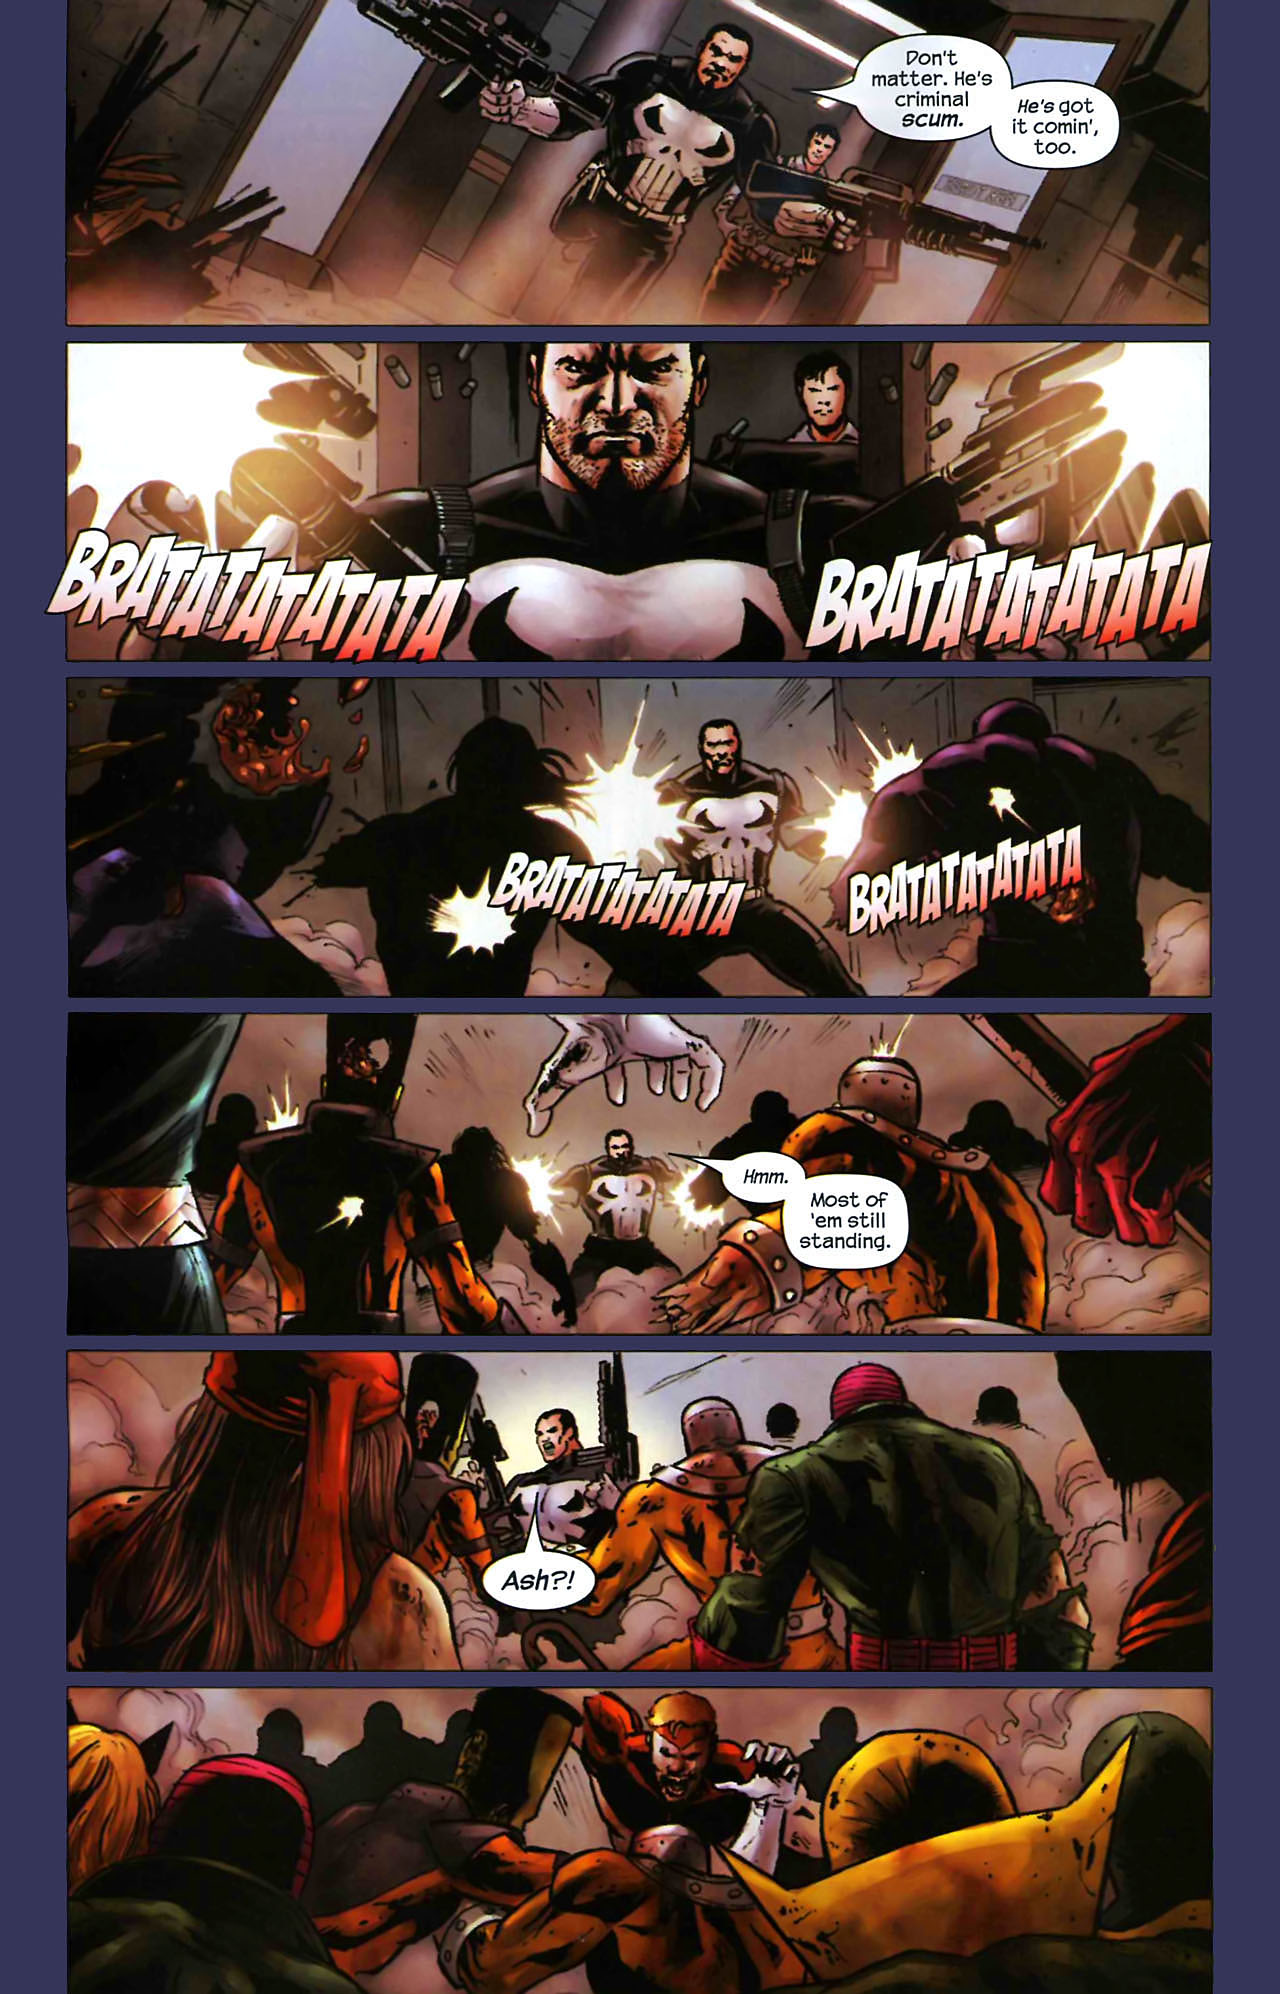 Marvel Zombies vs Army of Darkness 2 of 5